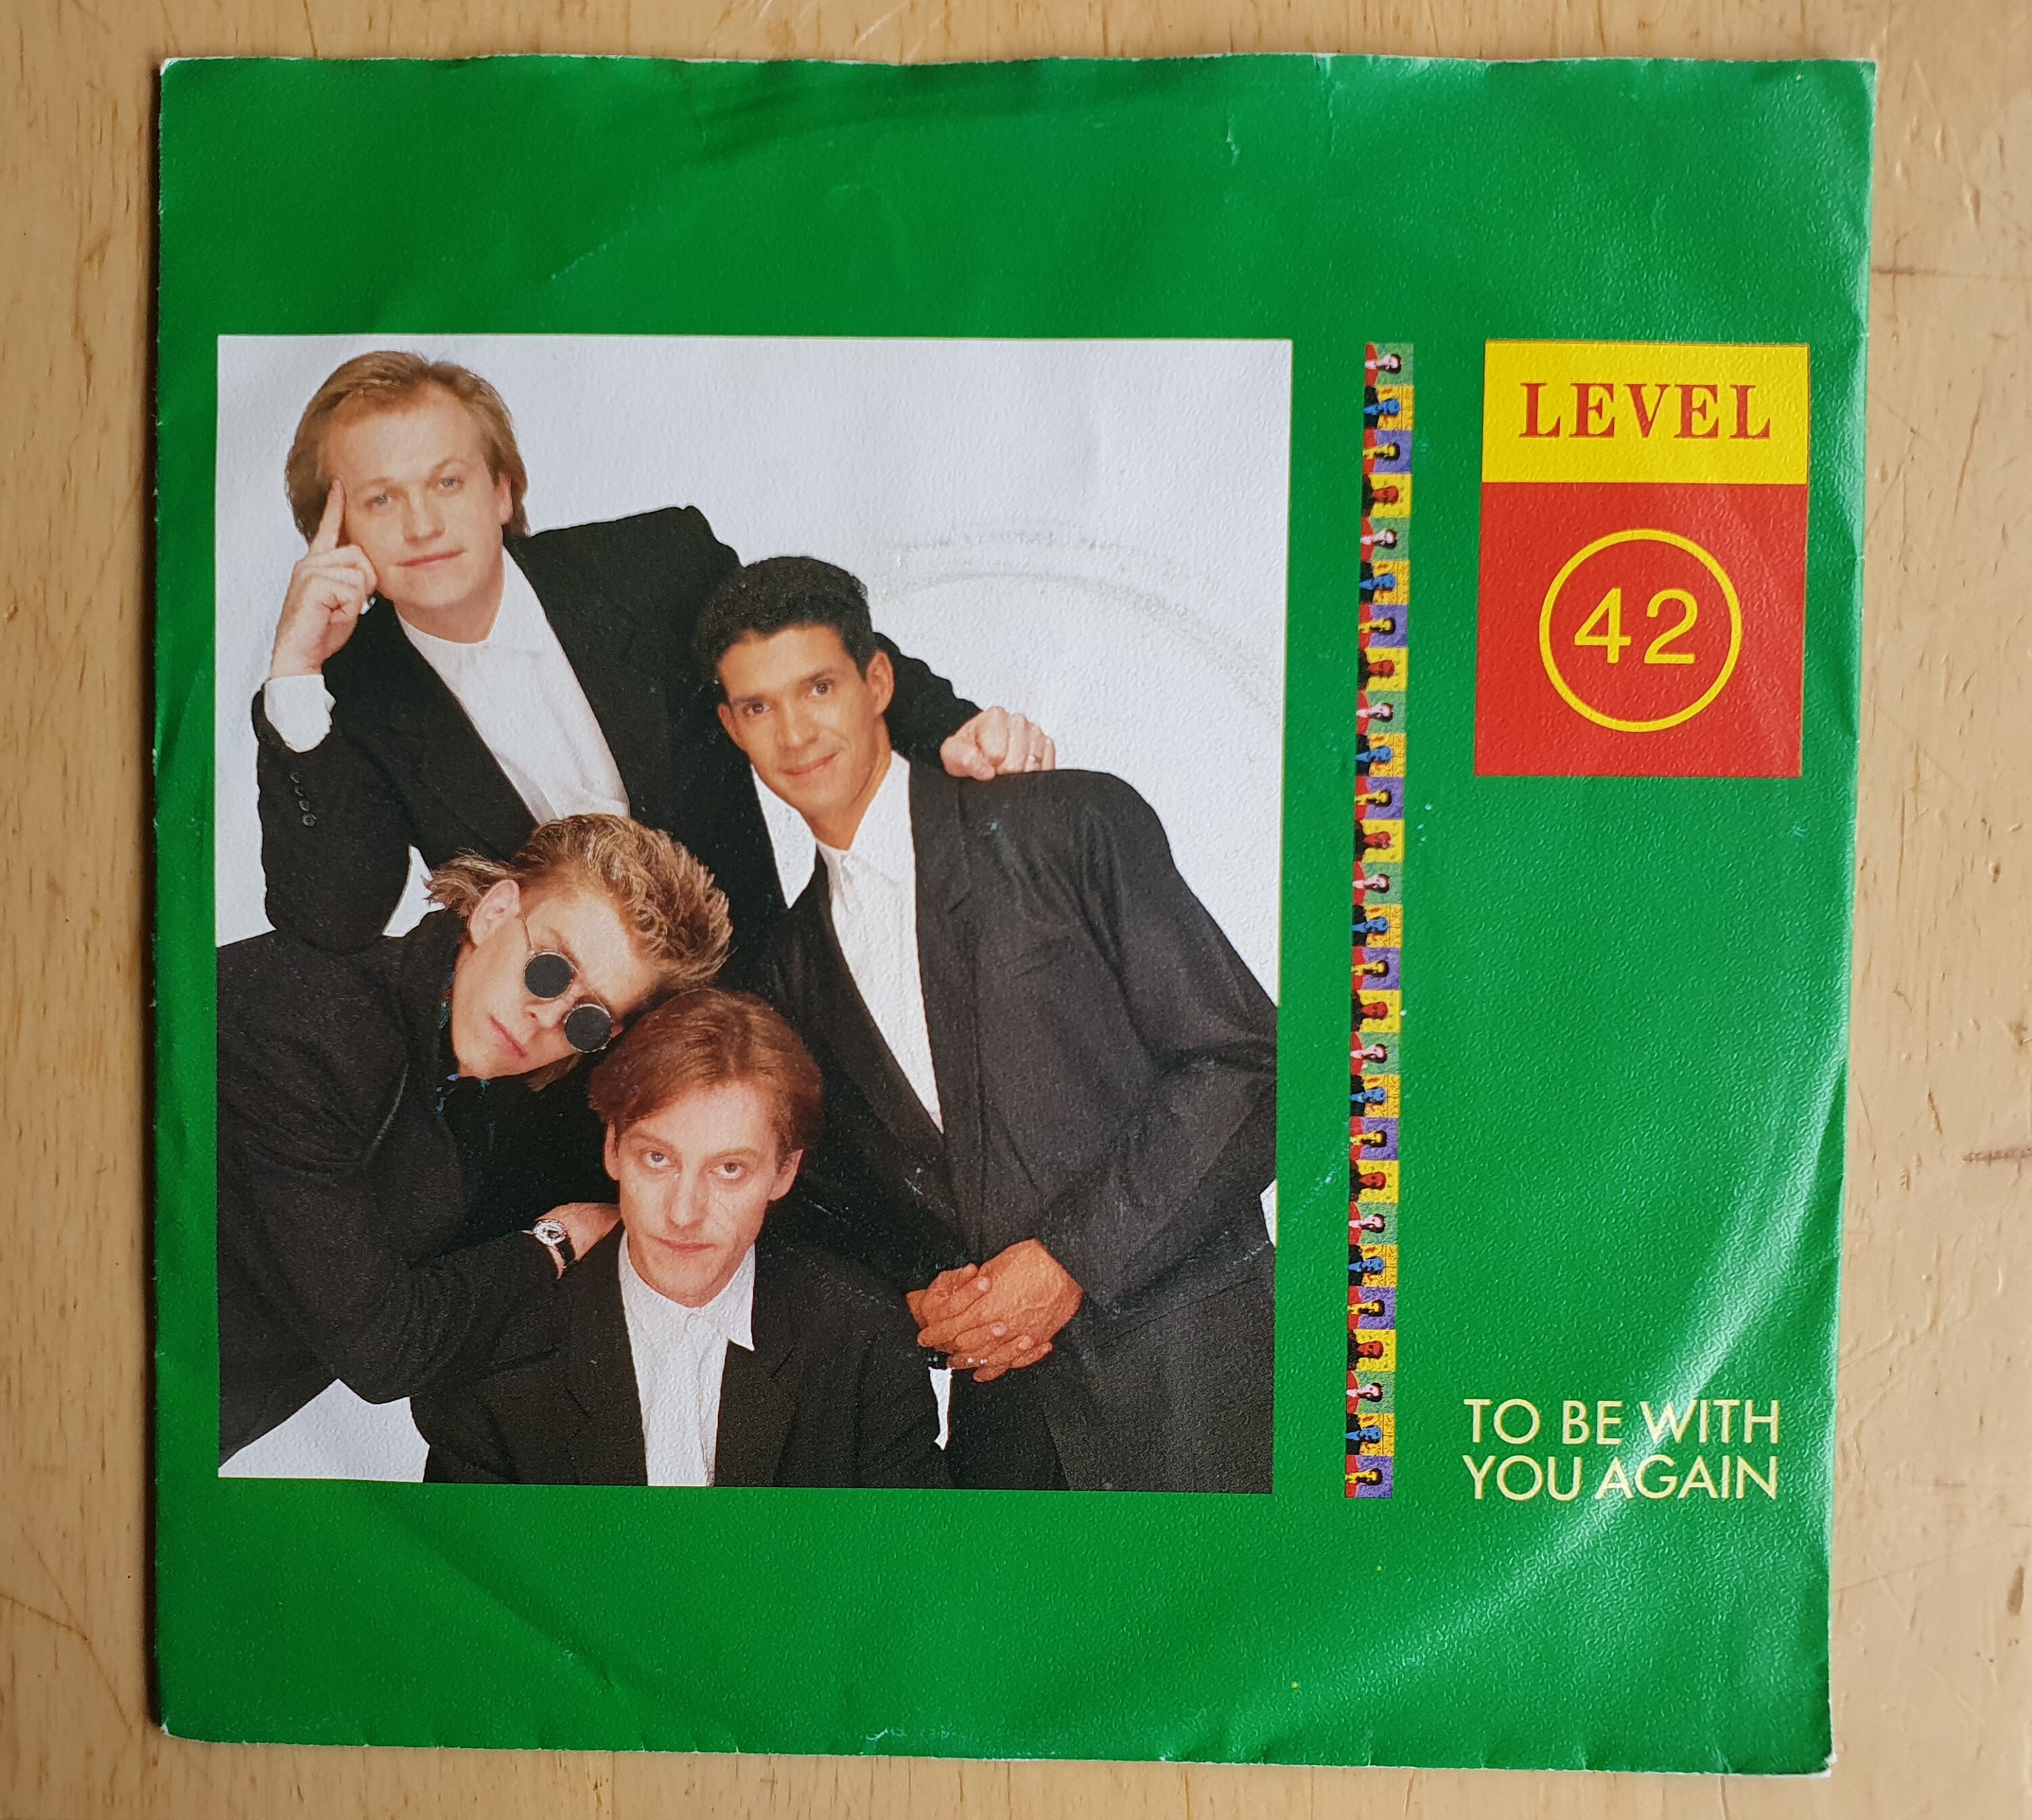 Level 42 Vinyl 7 Record Single Be With You Again - Etsy